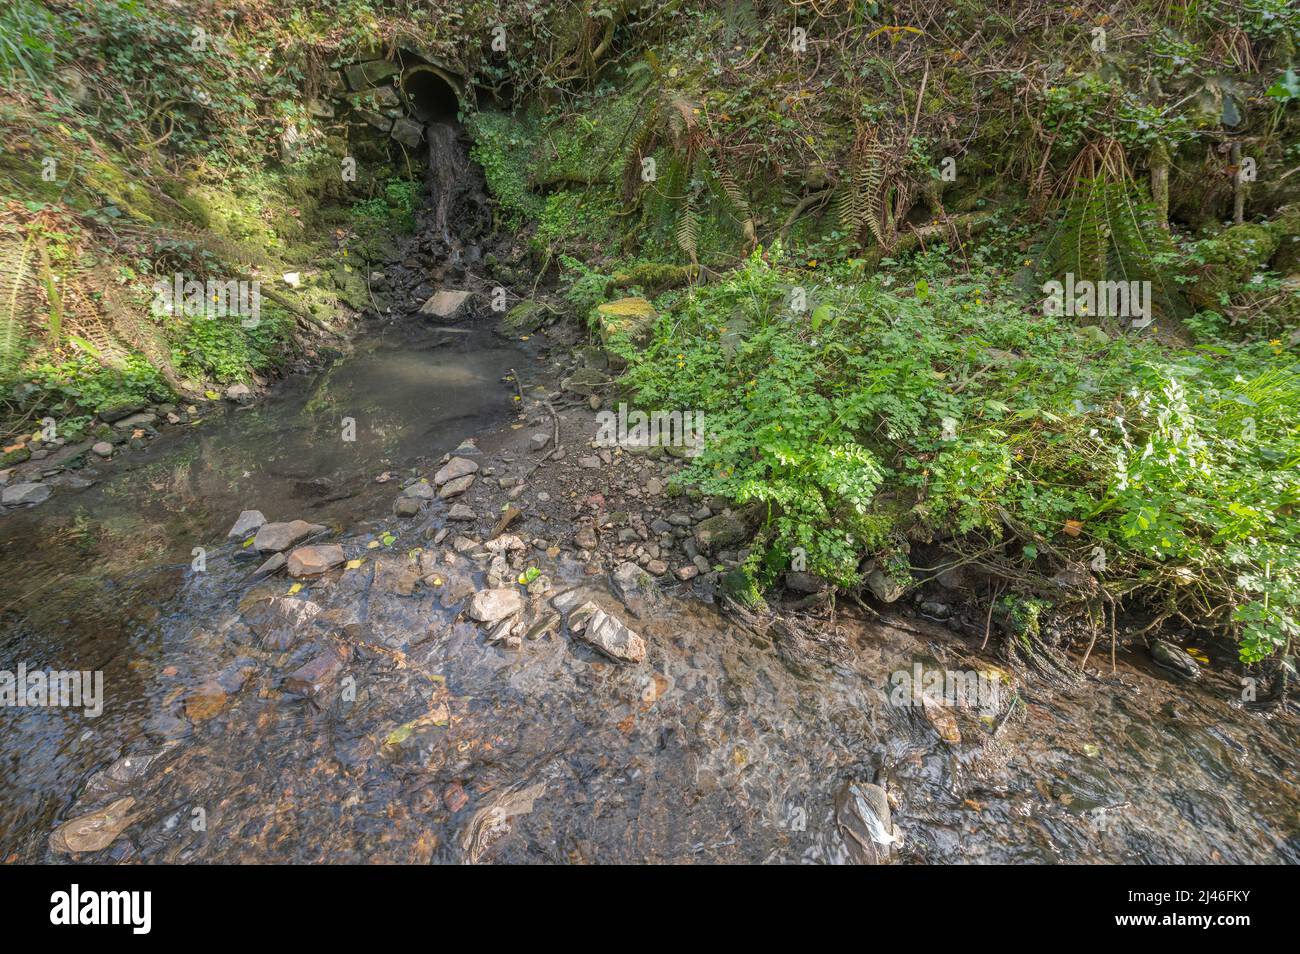 Pollution from outfall pipe discharging untreated sewage into a tributary of the Gwendraeth Fawr, Trimsaran, Carmarthenshire, Wales, UK. Streambed is Stock Photo